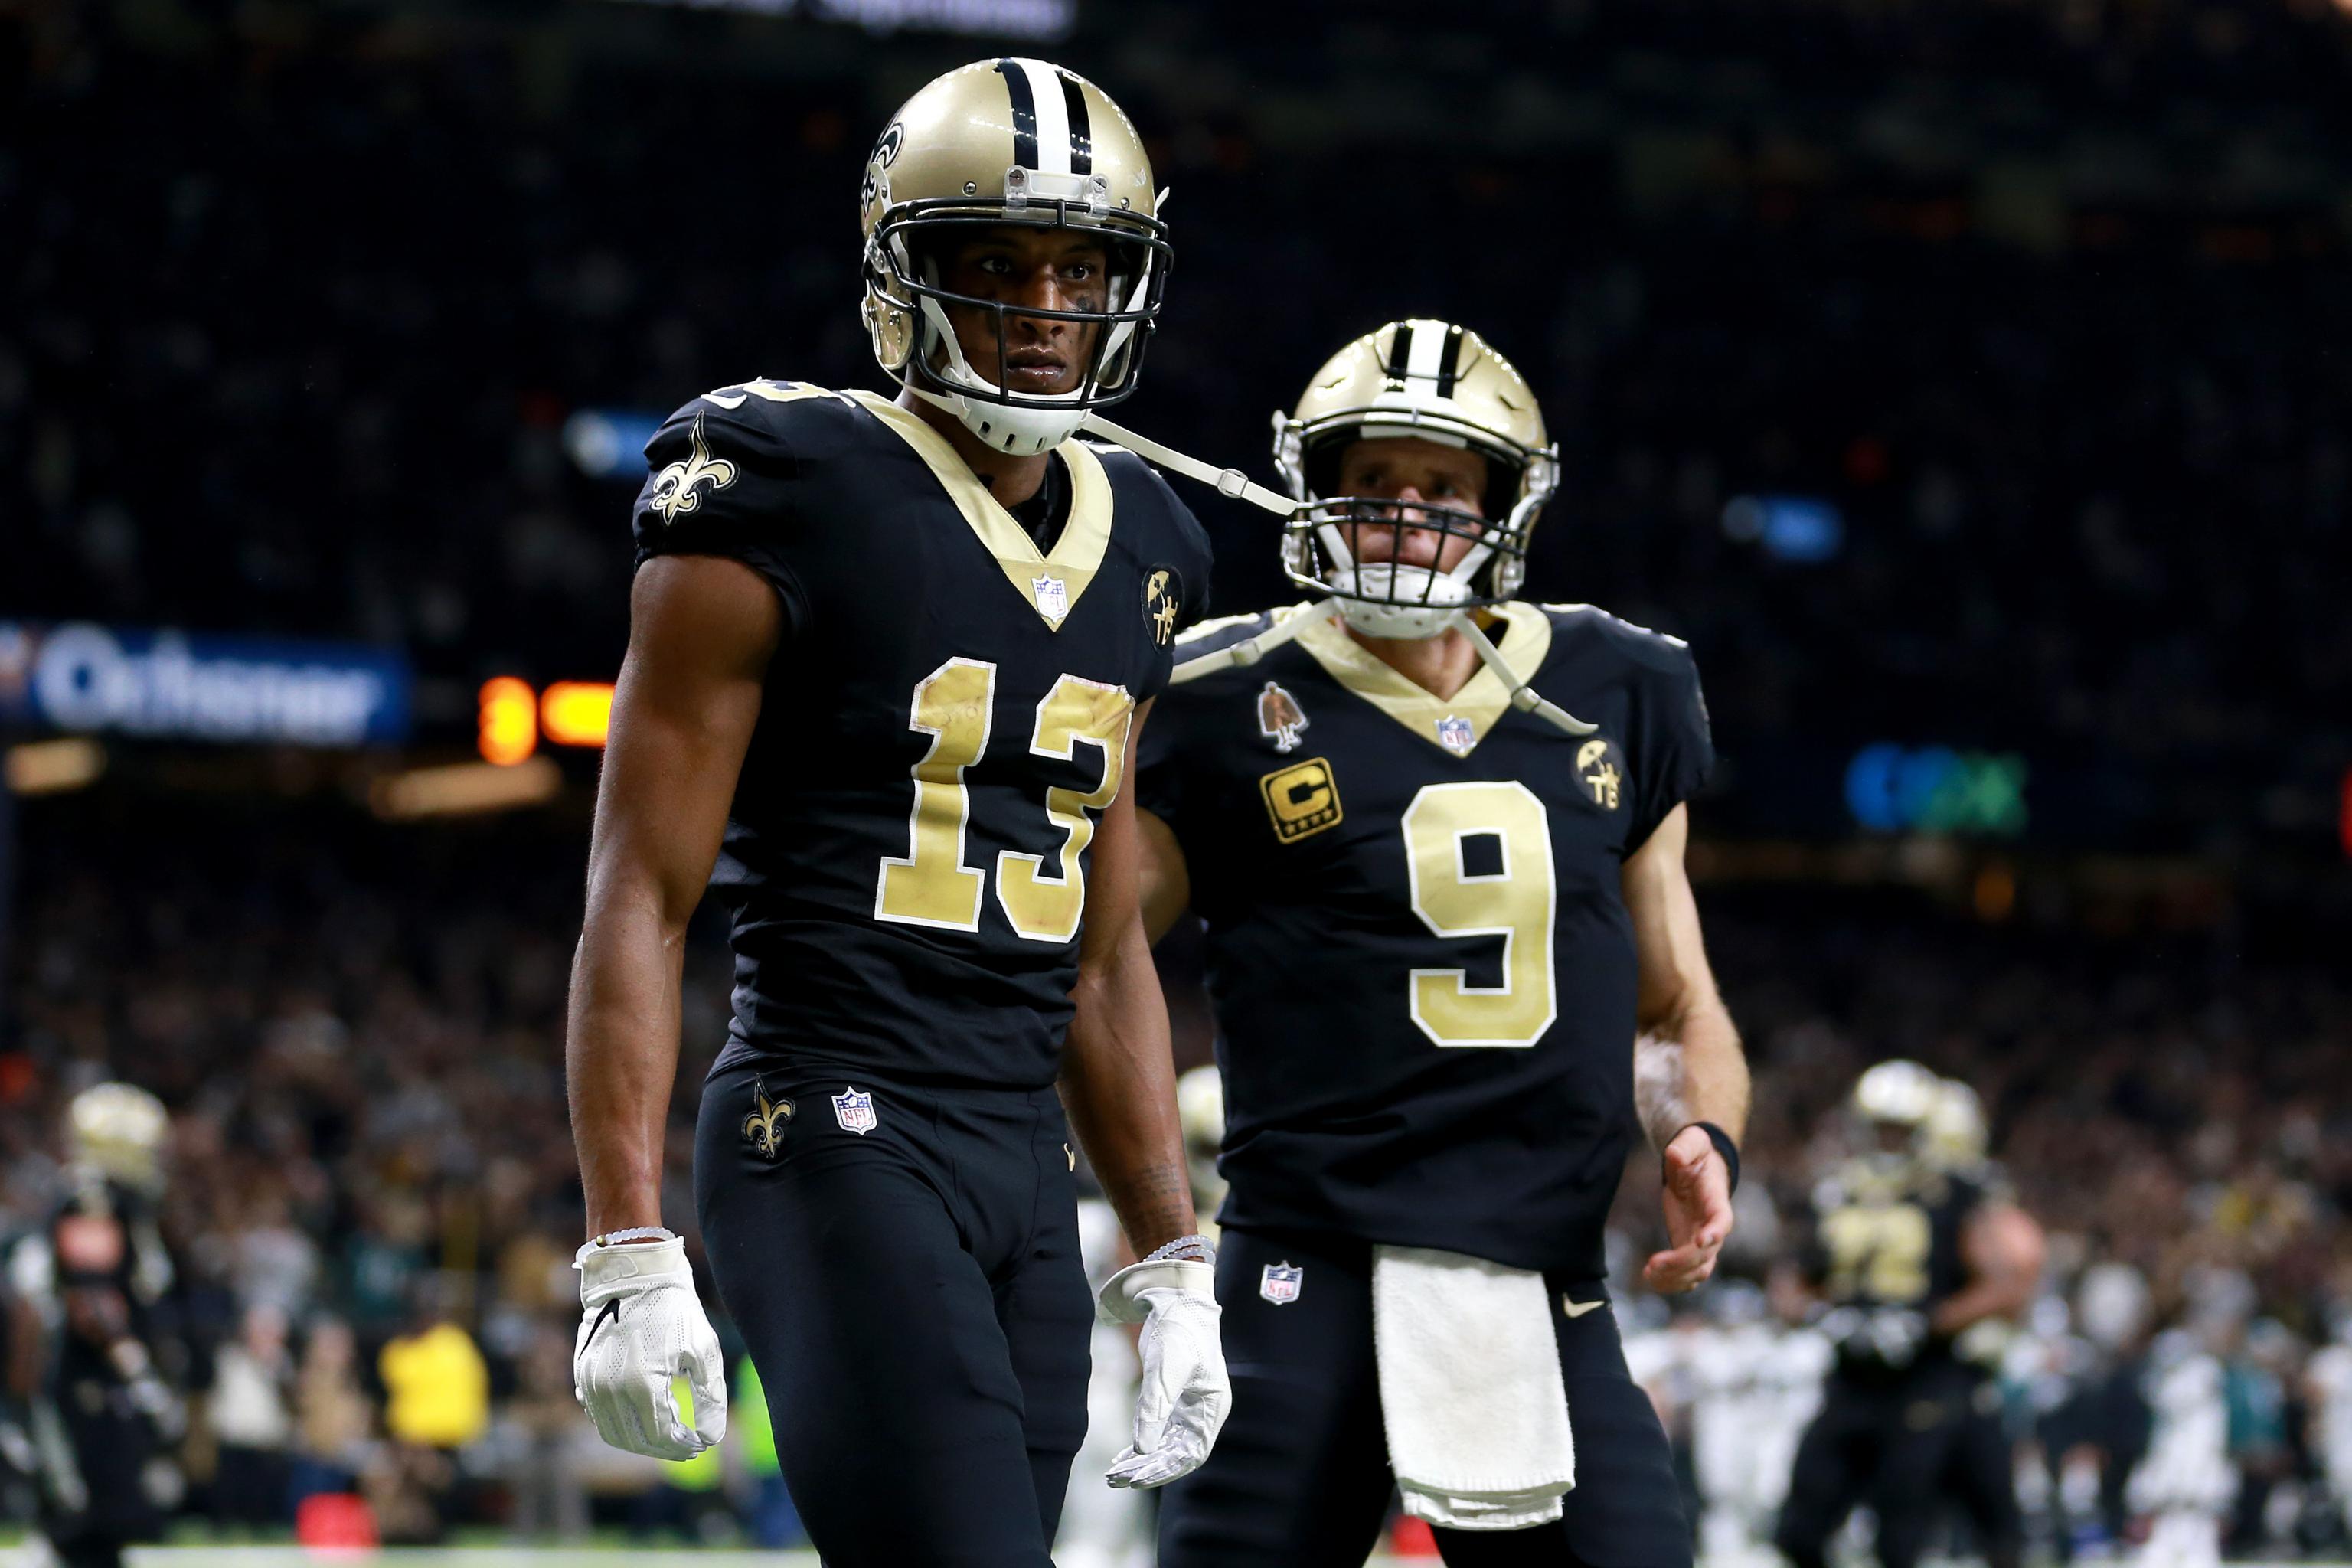 Michael Thomas and Drew Brees eyeing the Bears ahead of their wild card matchup